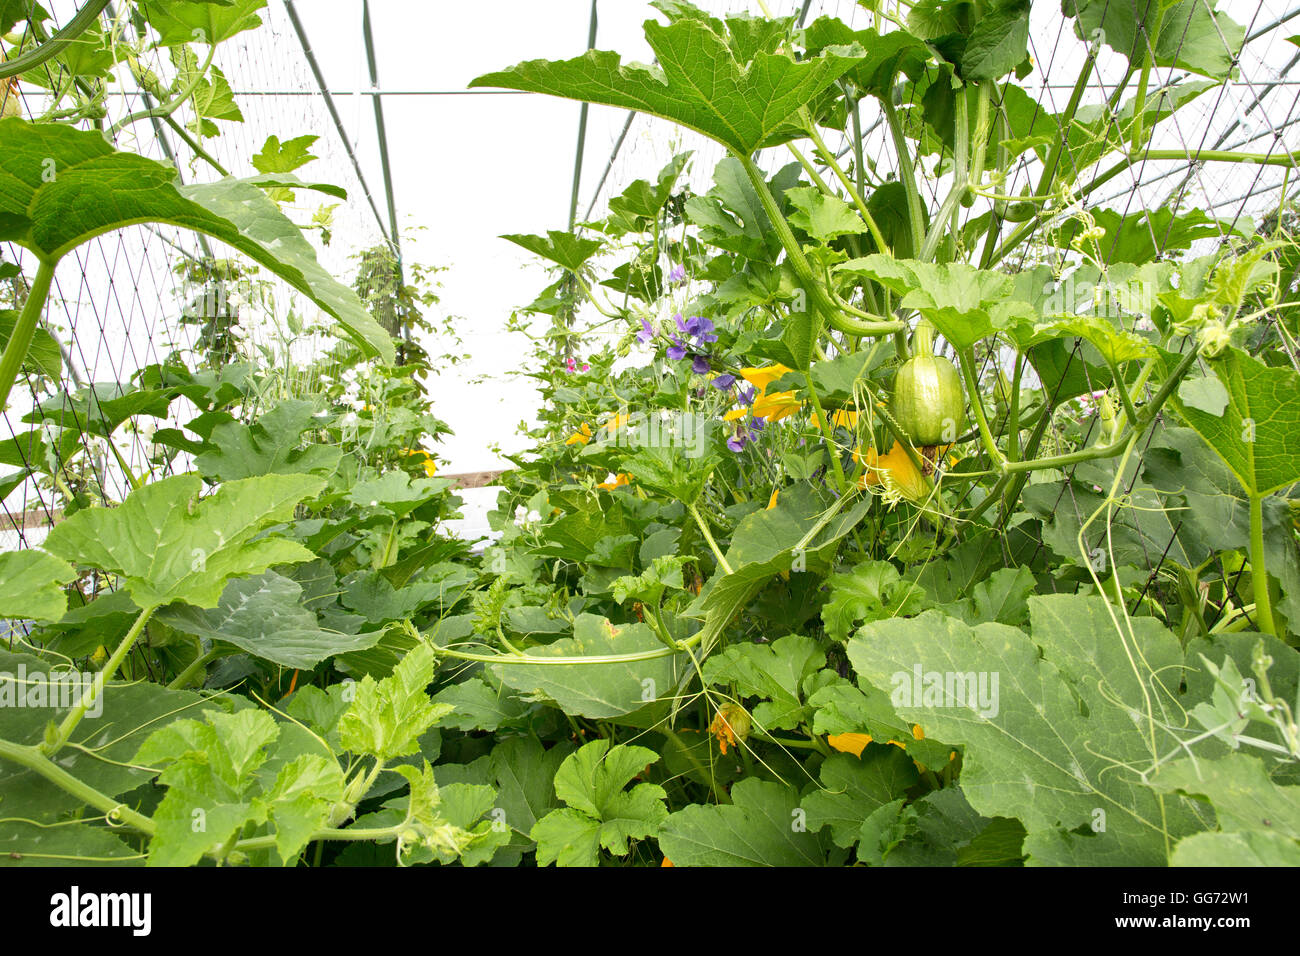 Spaghetti Squash growing,  flowering  in tunnel, hop plants in the background. Stock Photo